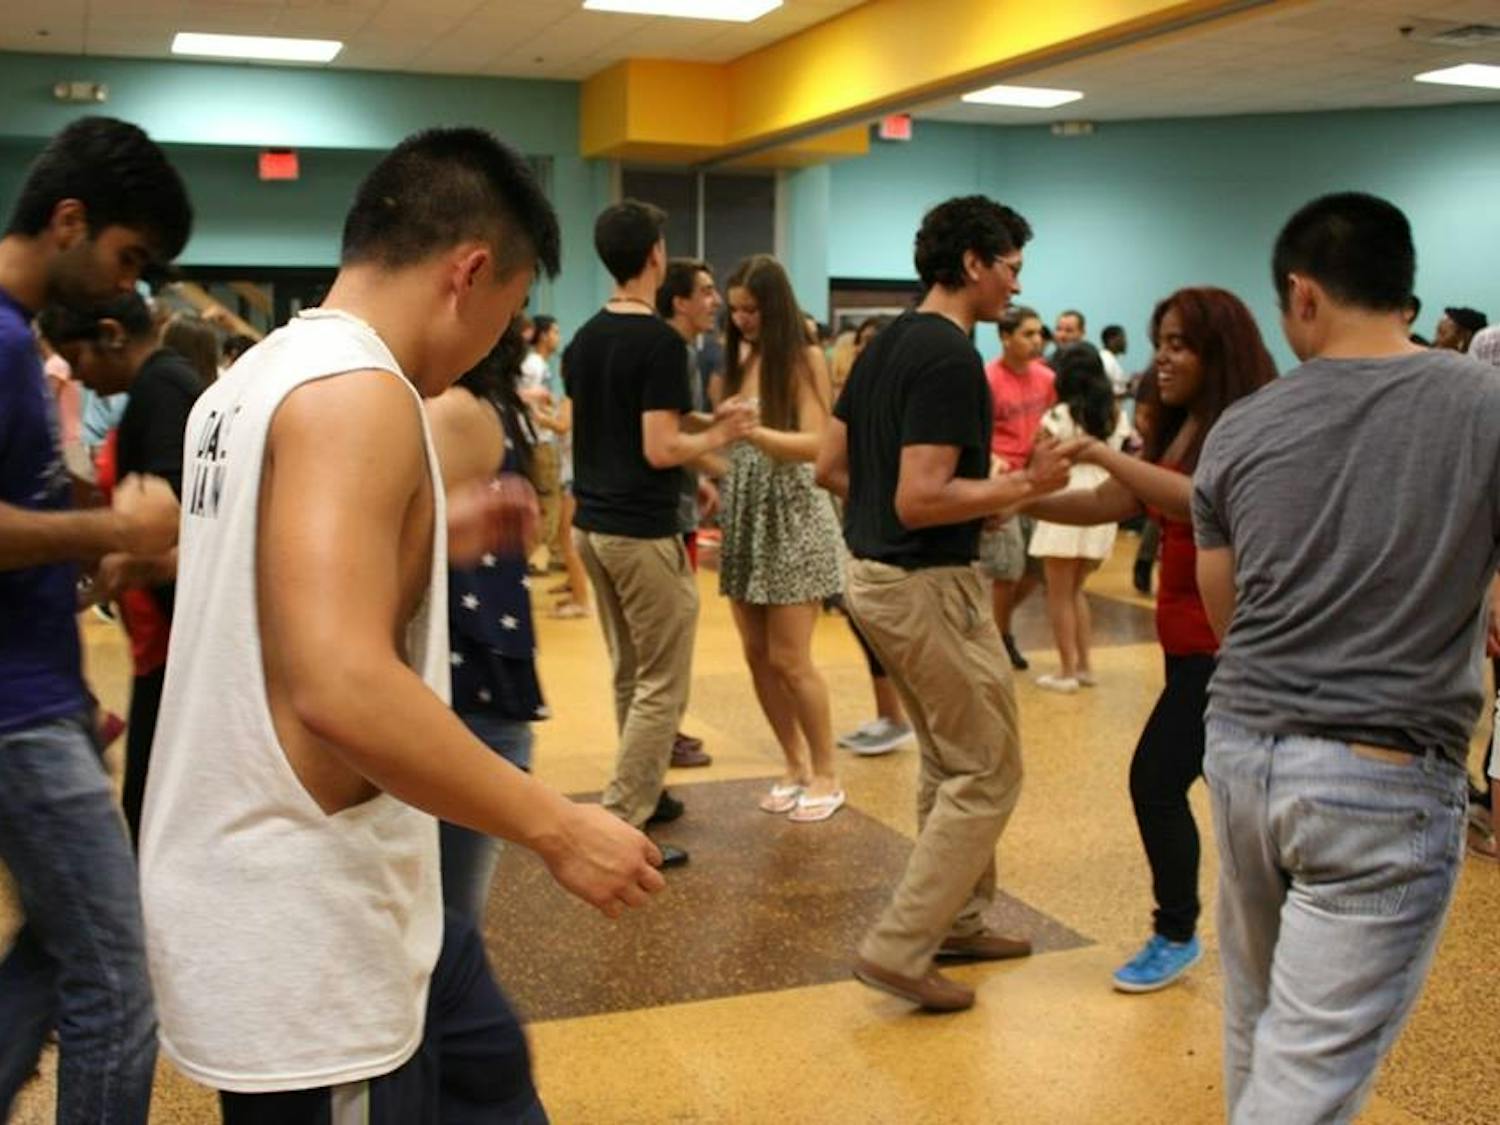 The Latin American Student Association hosts socials every Tuesday night to teach members and new participants about dances from all different countries.